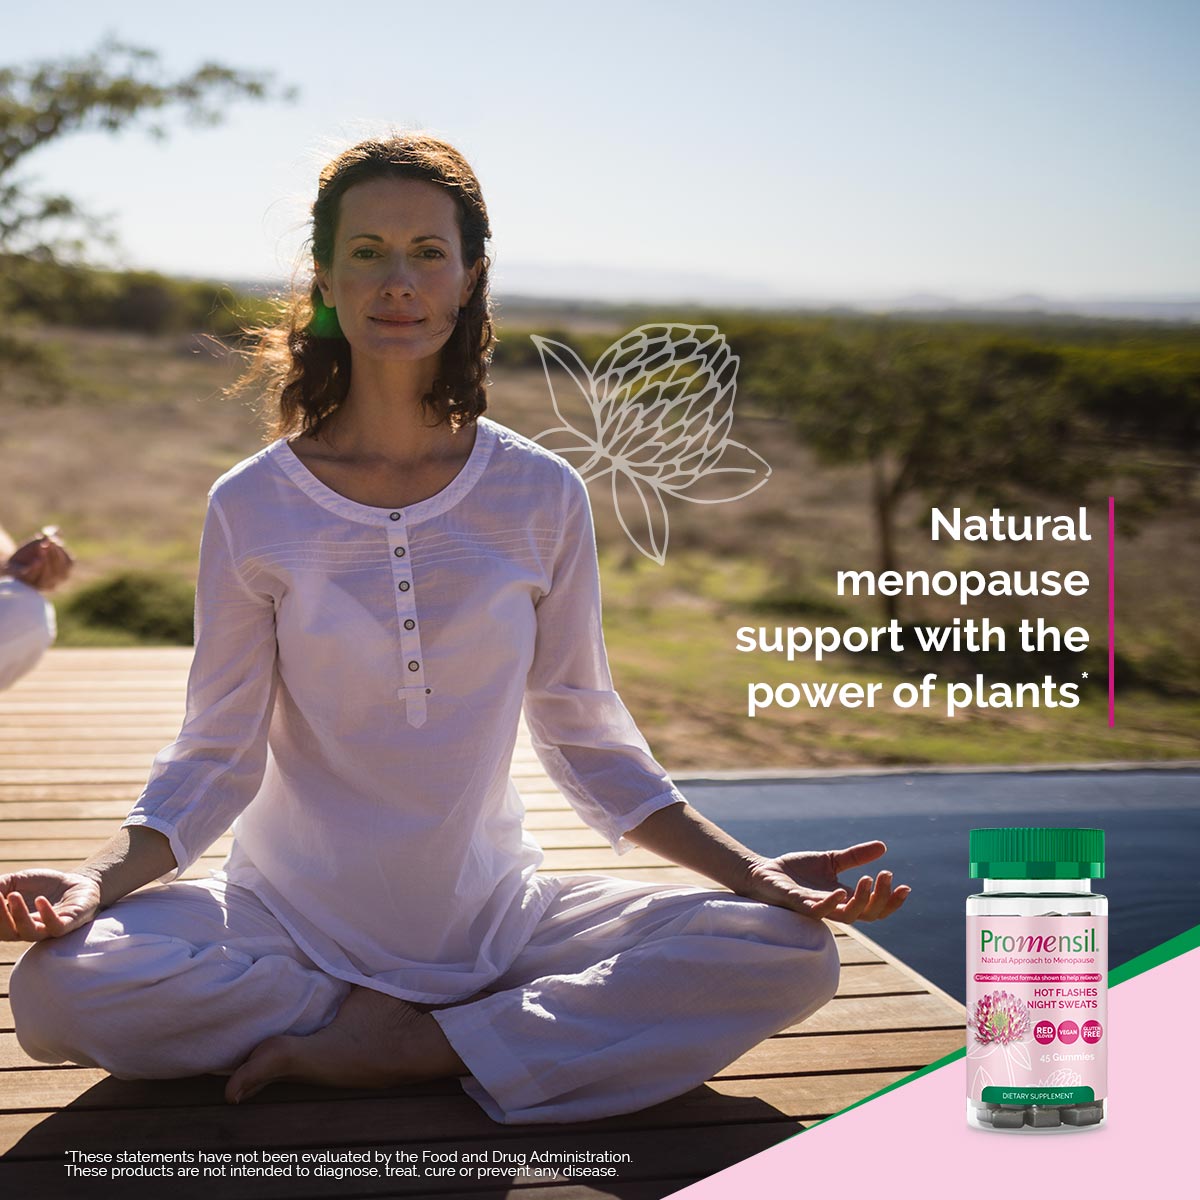 Natural menopause support with the power of plants